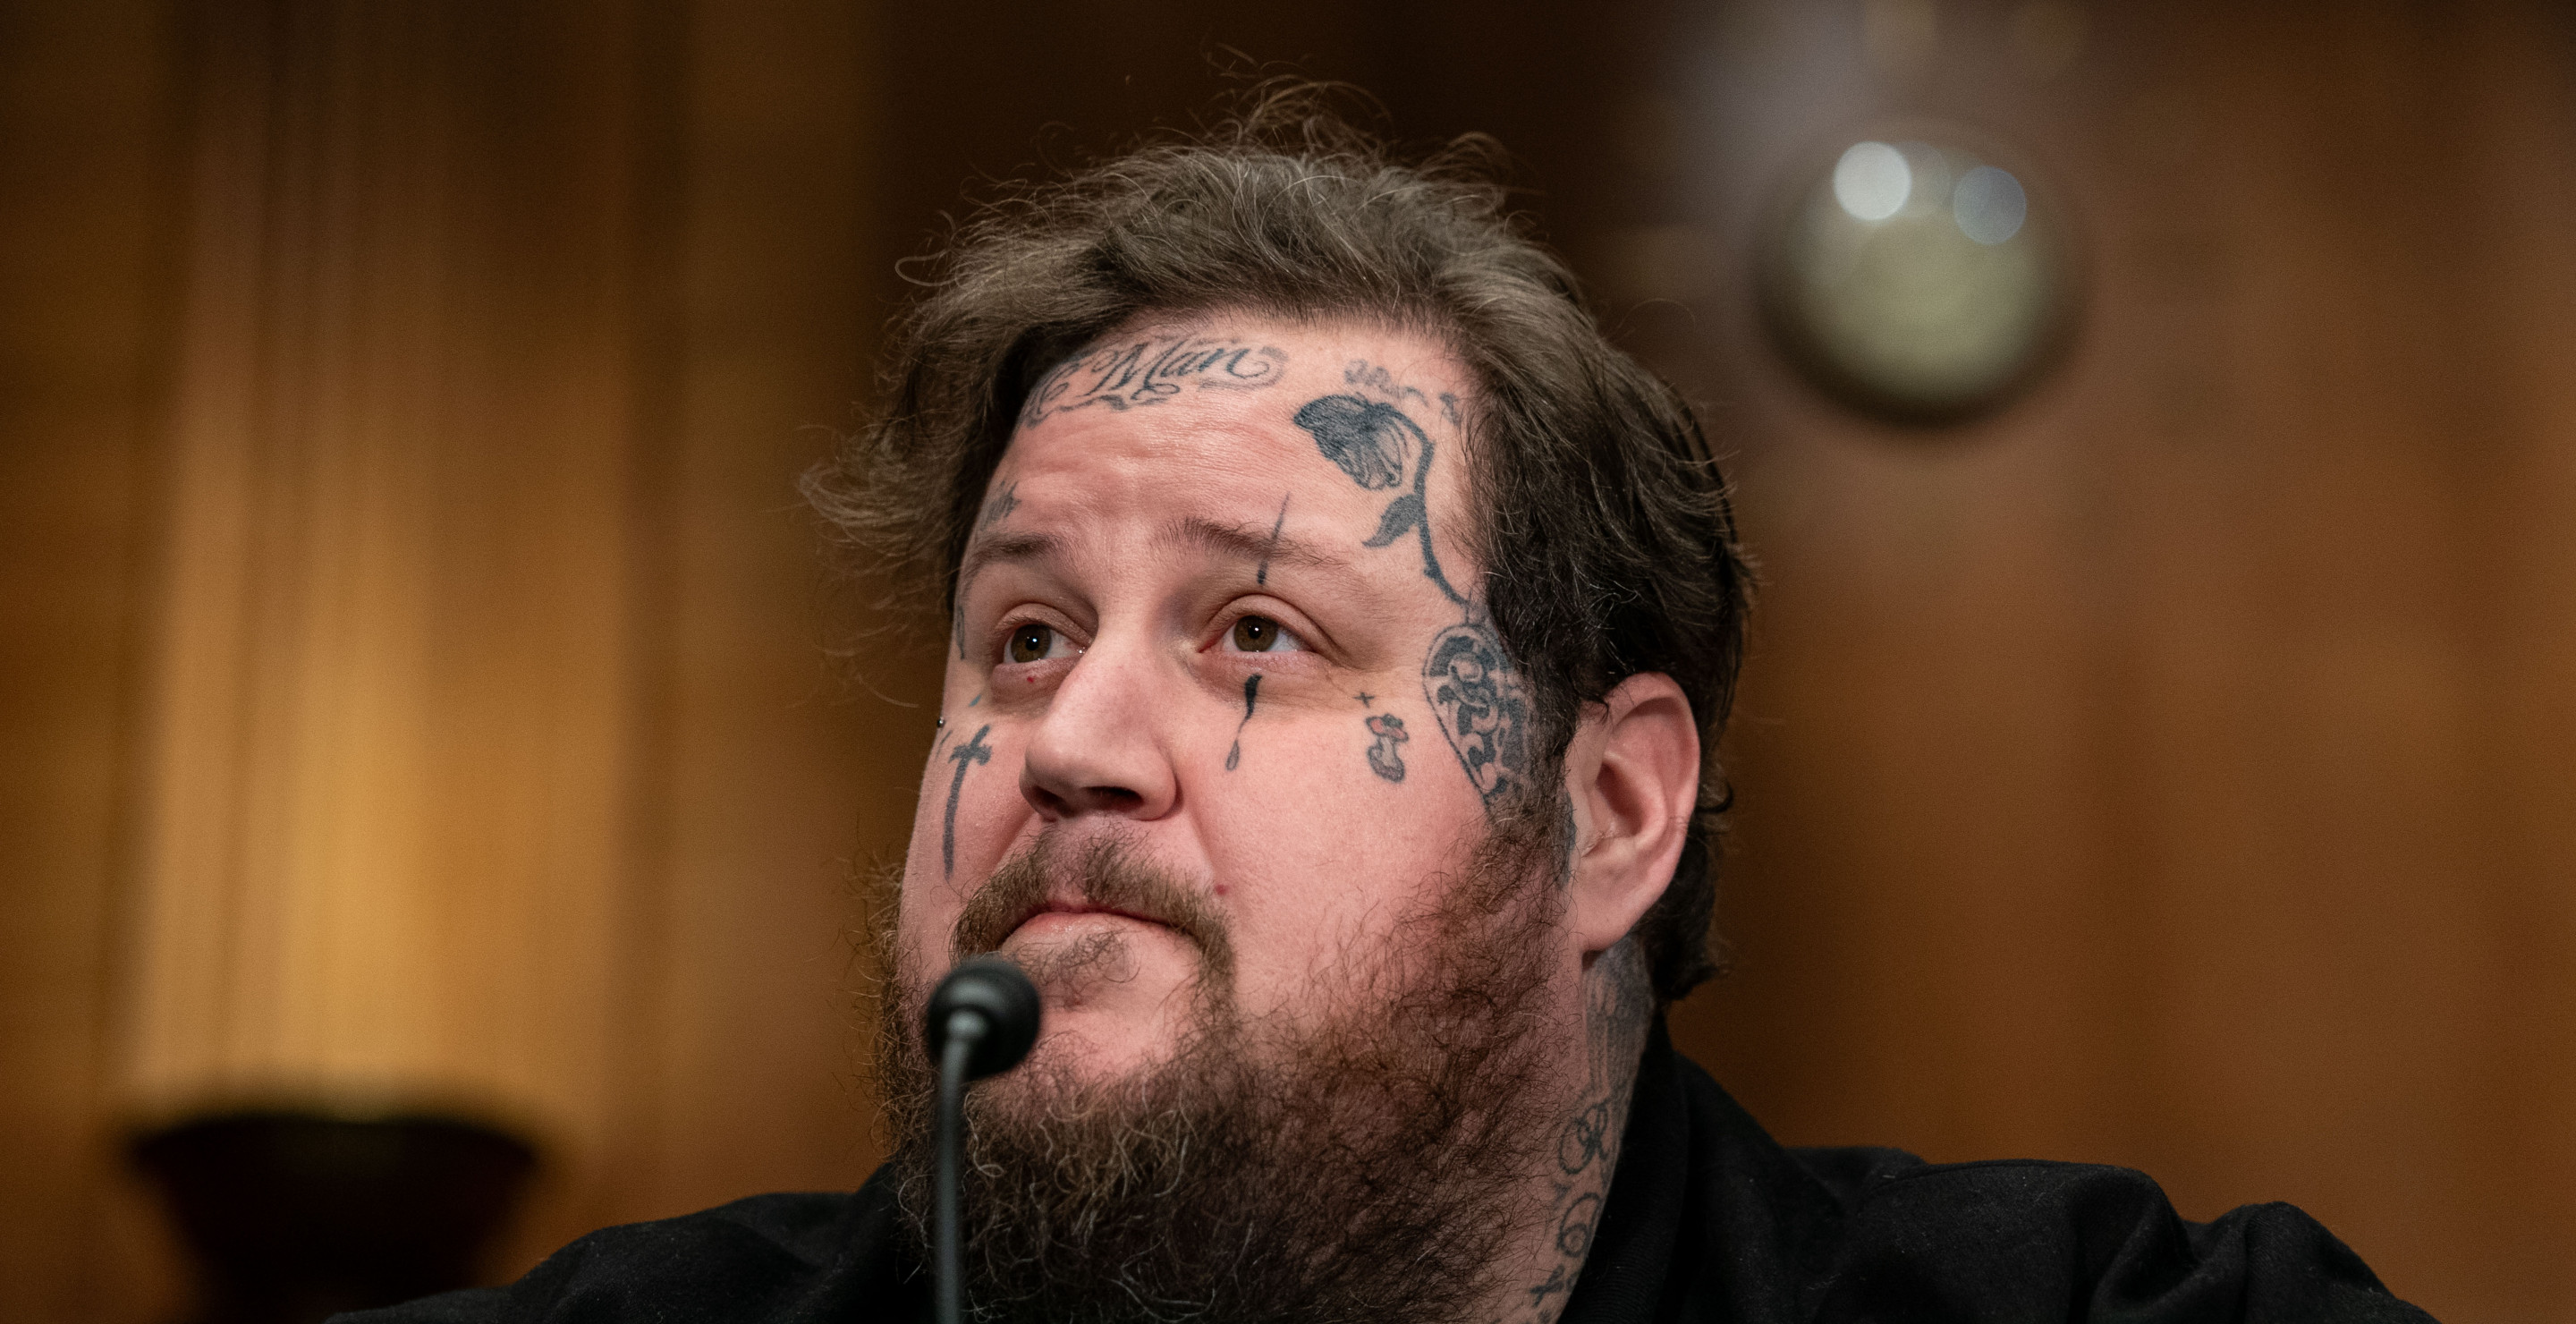 Jelly Roll Says He Got Infections From Bad Tattoos In The Past